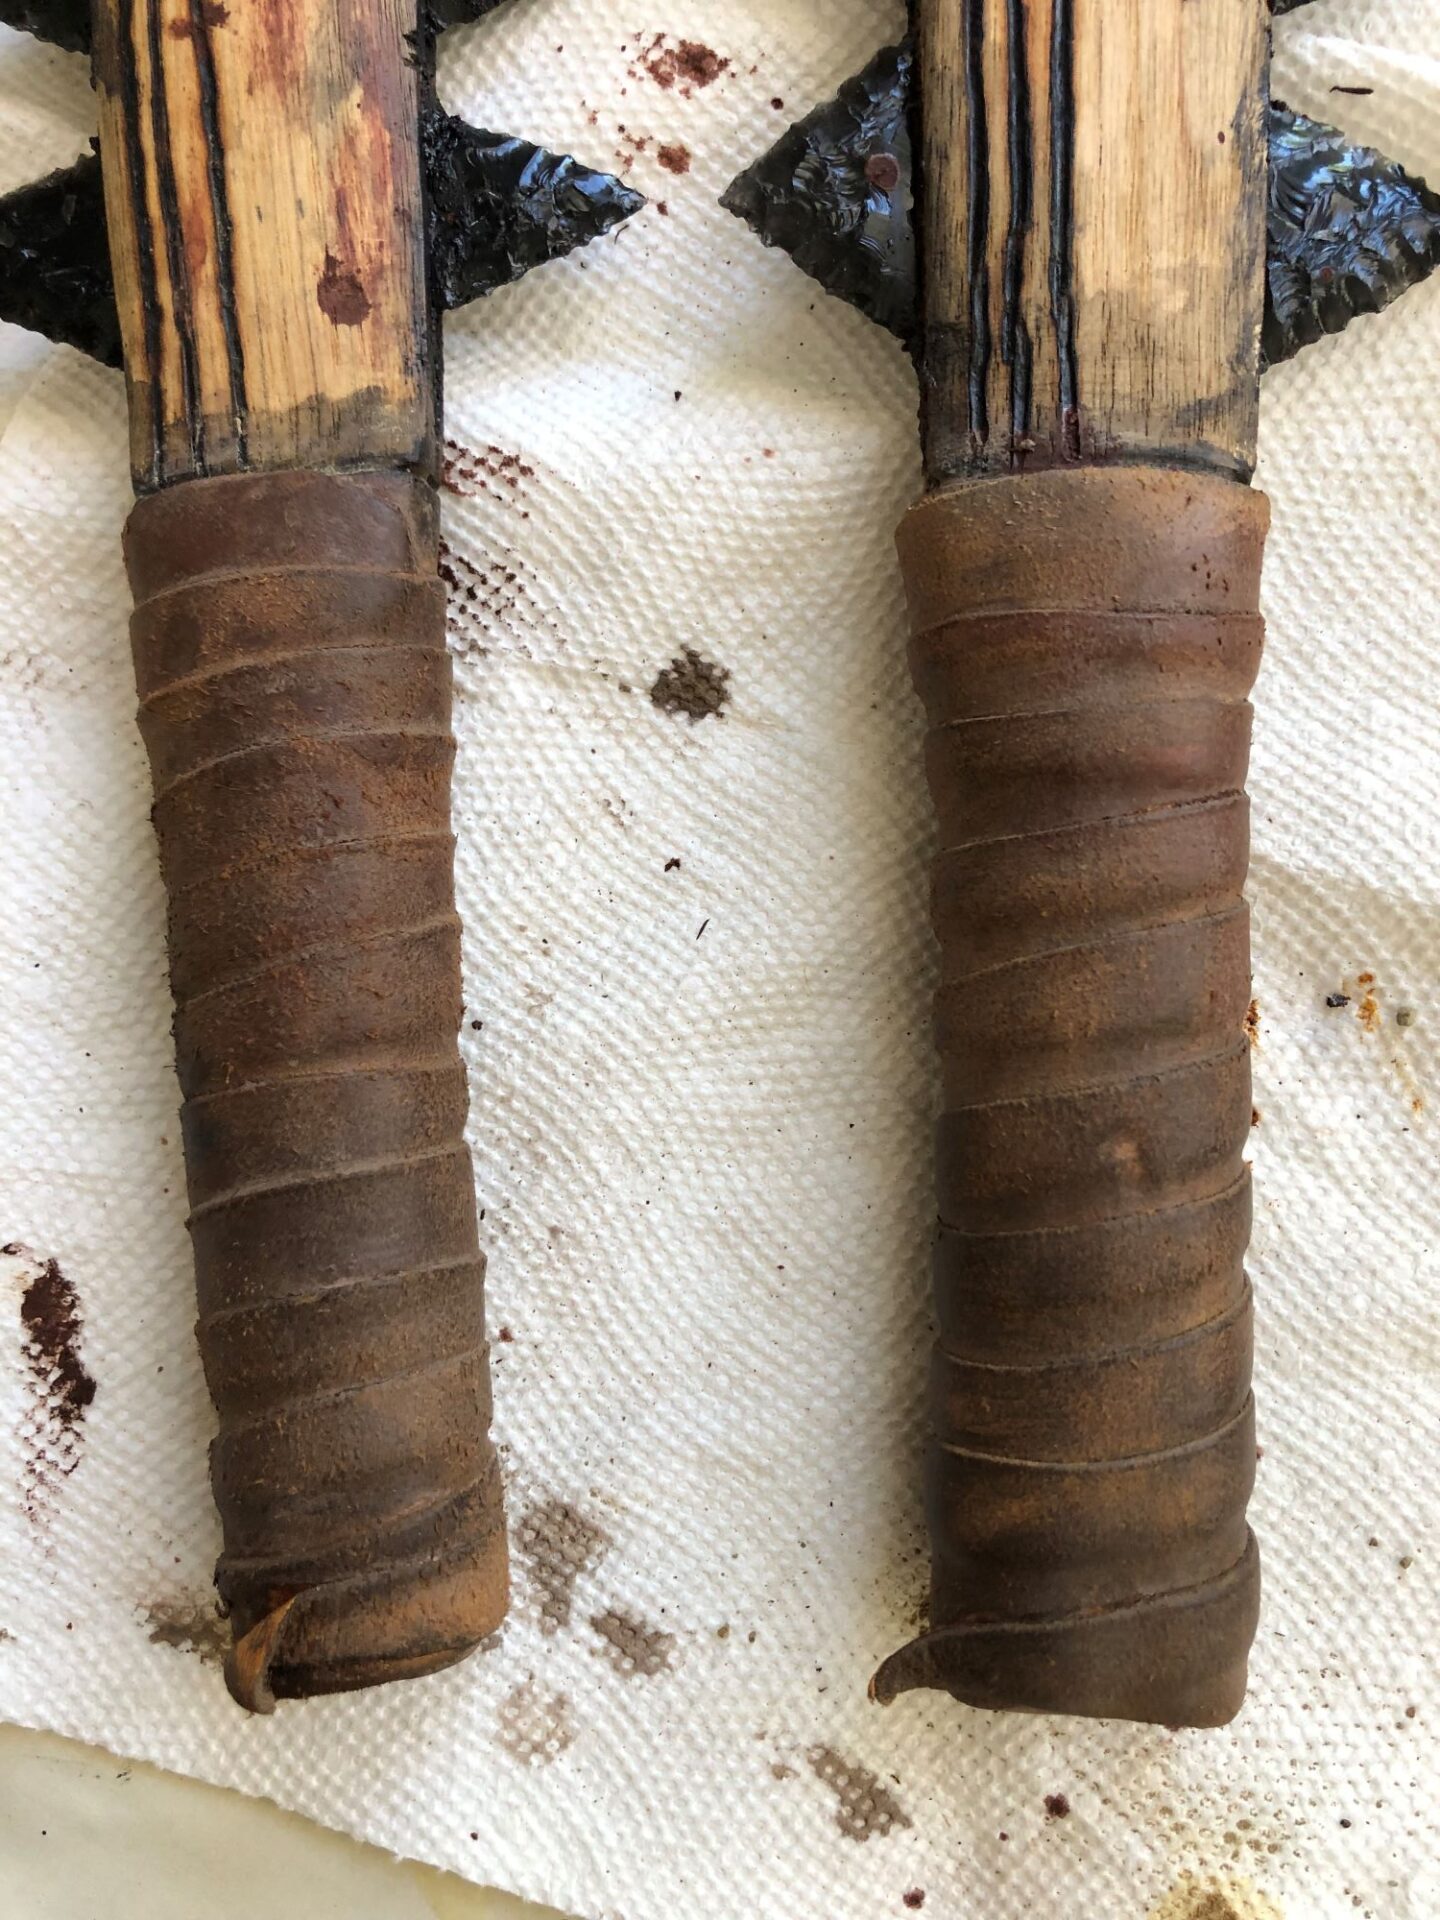 I wrapped the hilts with buckskin and dirtied them up. They looked like old tennis racquet handles!